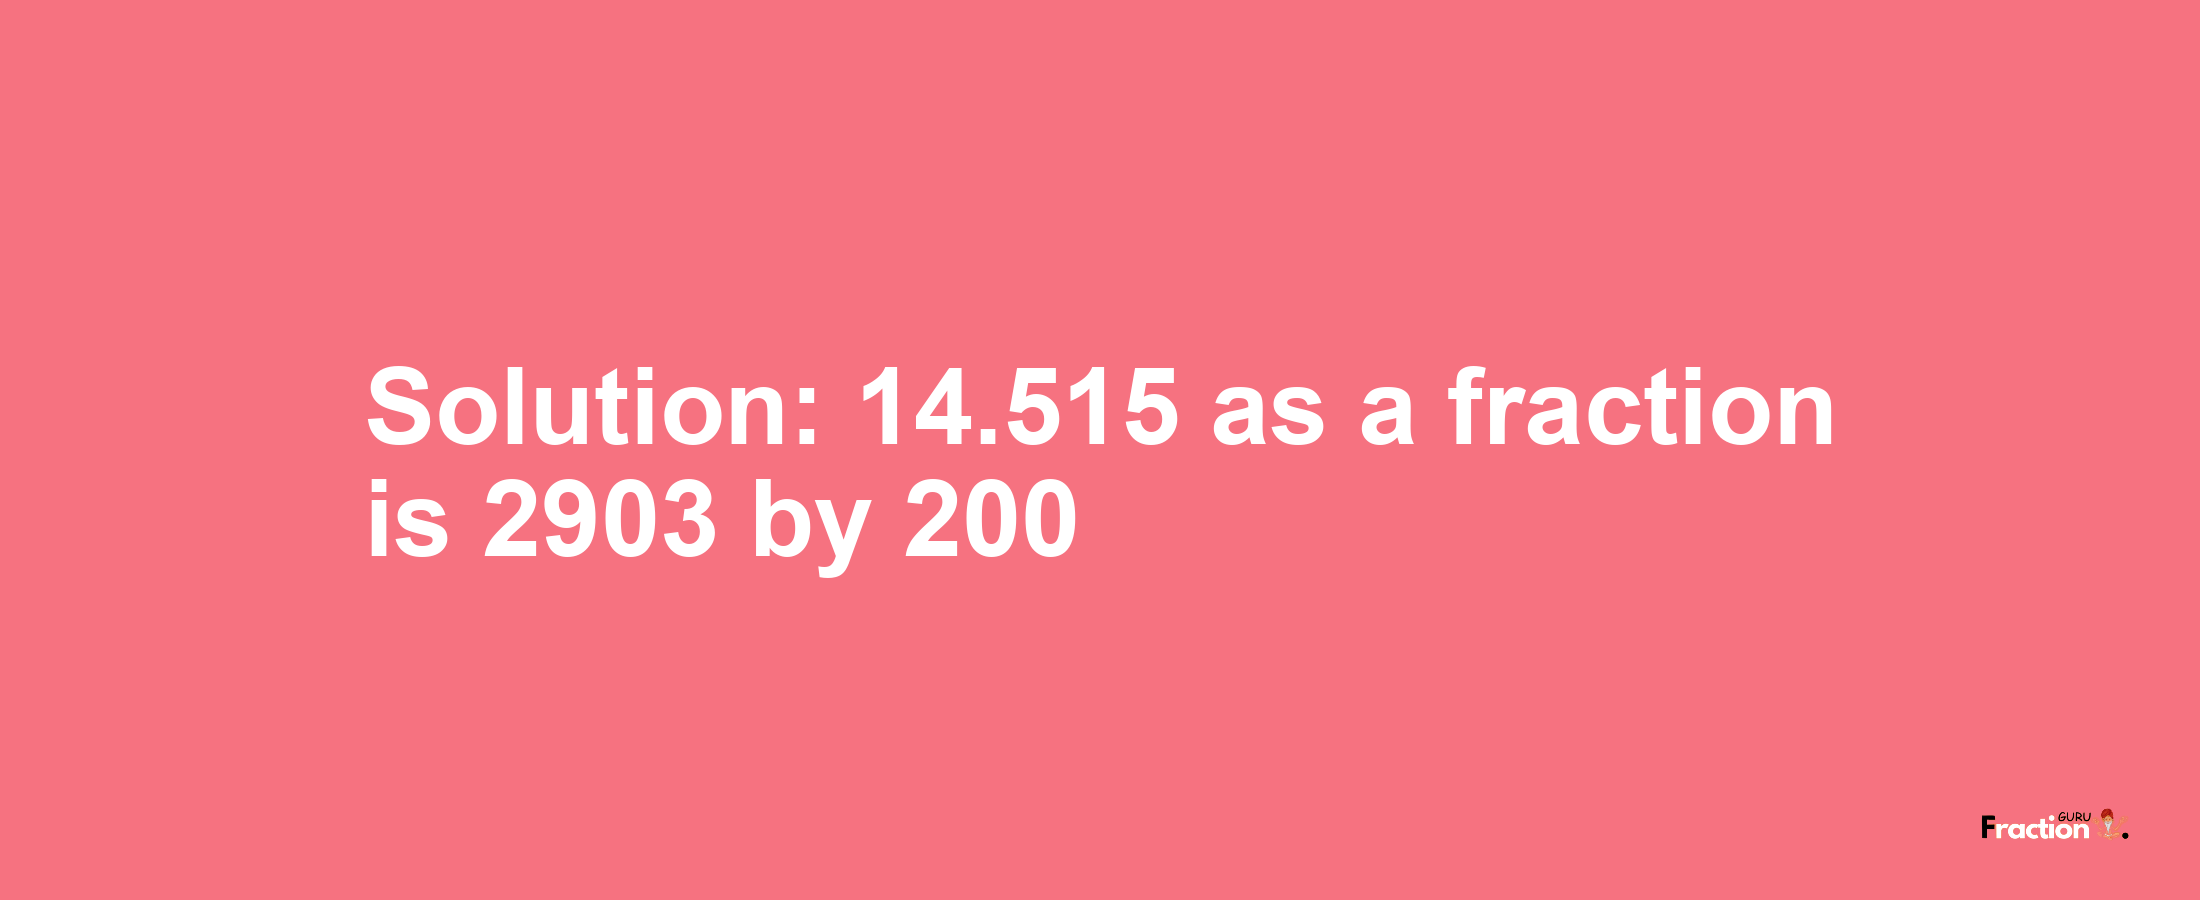 Solution:14.515 as a fraction is 2903/200